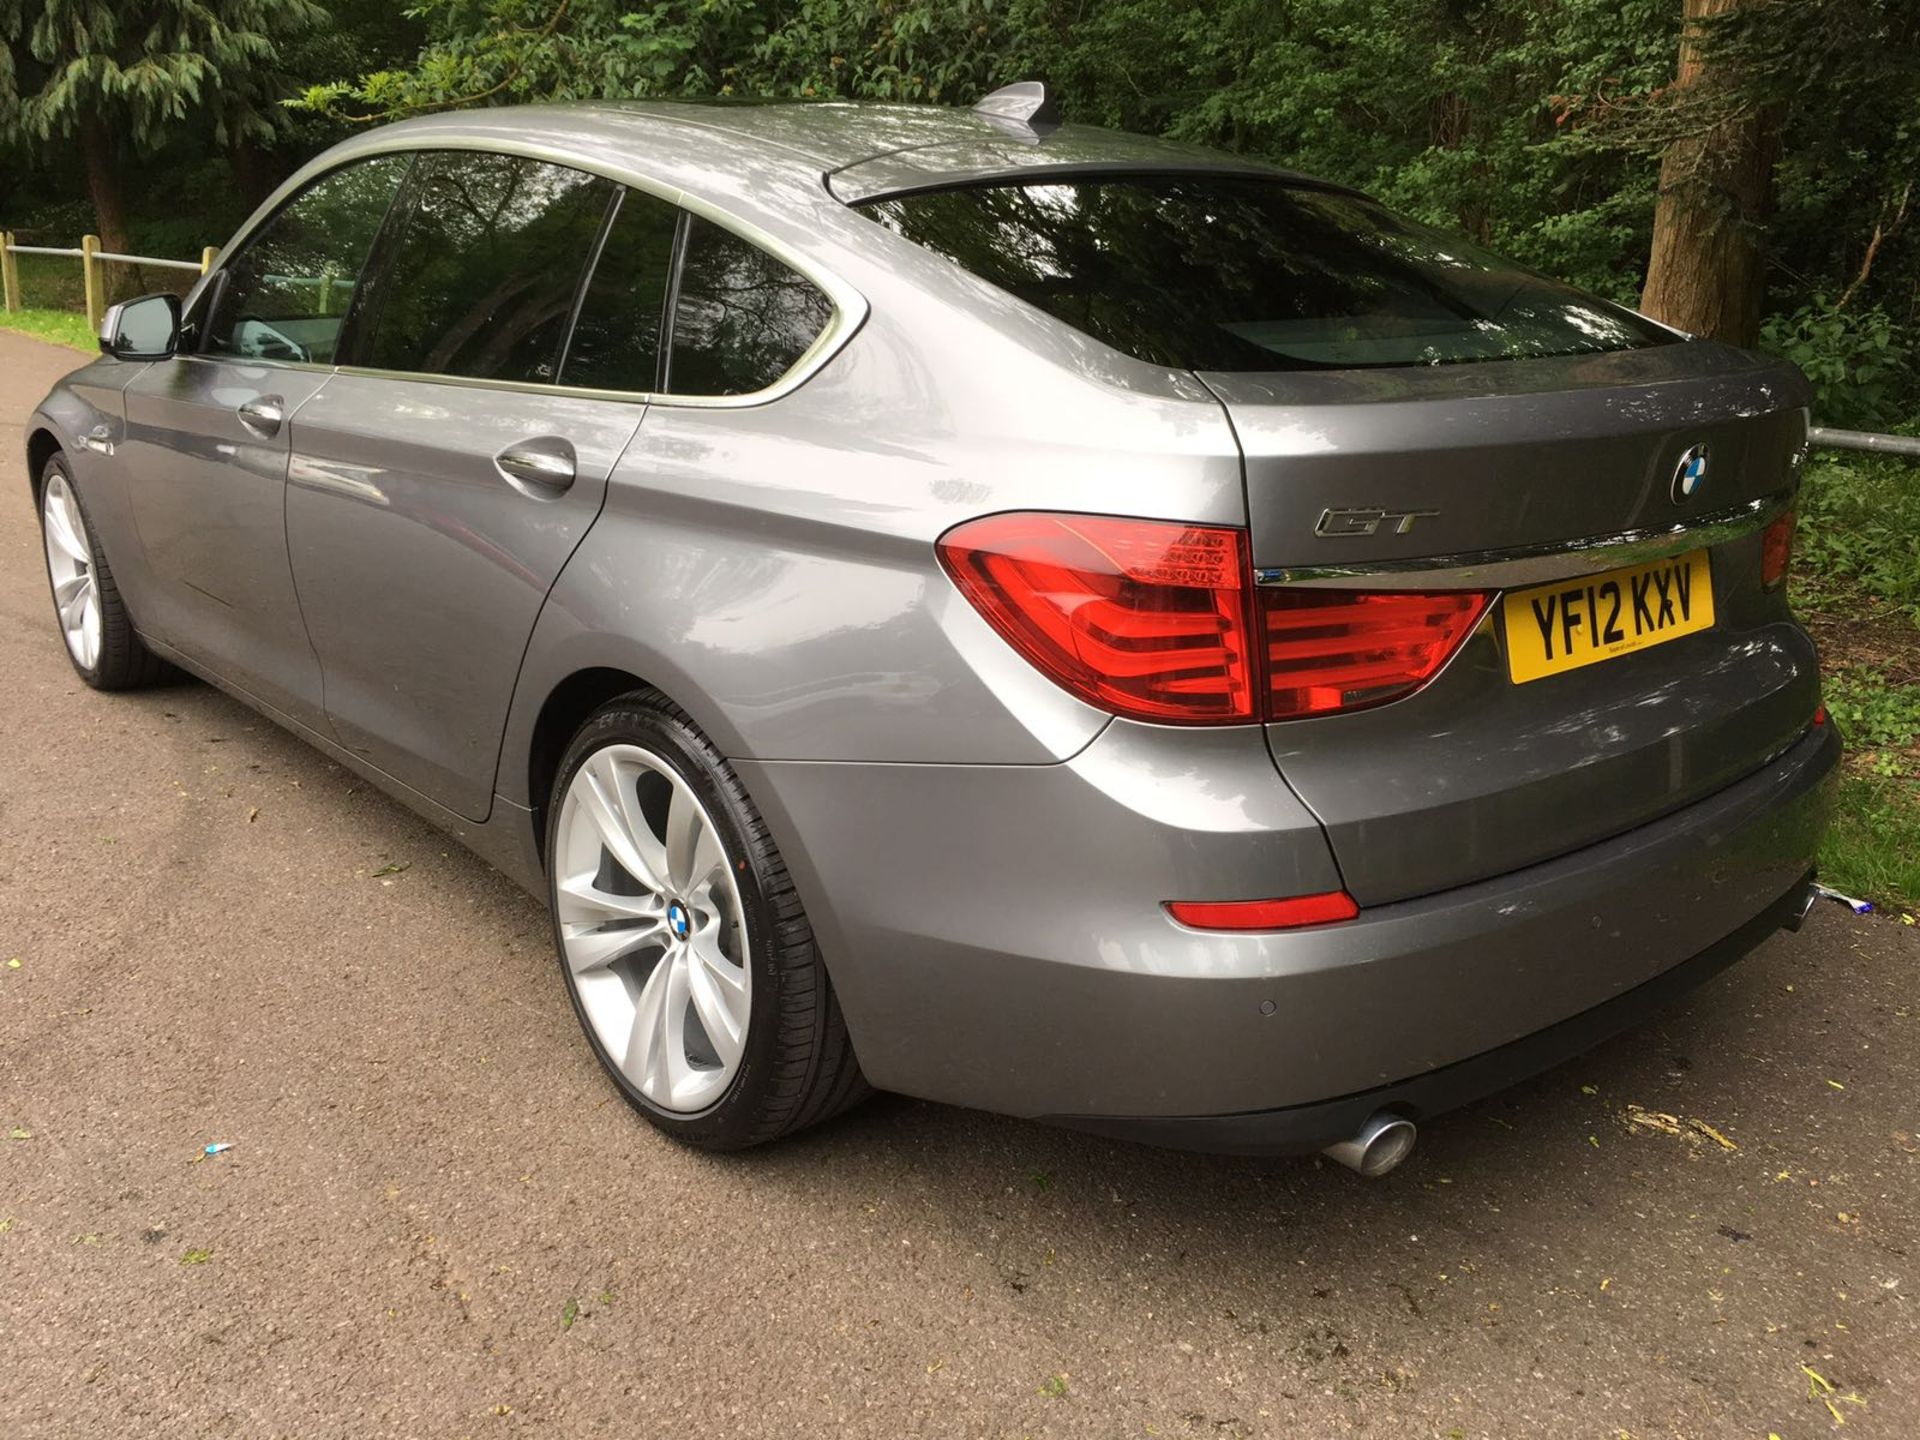 BMW 535d GT GRAN TURISMO 2012/12. 57,000 miles Mega spec and fully loaded. 4 New Tyres Just Fitted! - Image 4 of 19